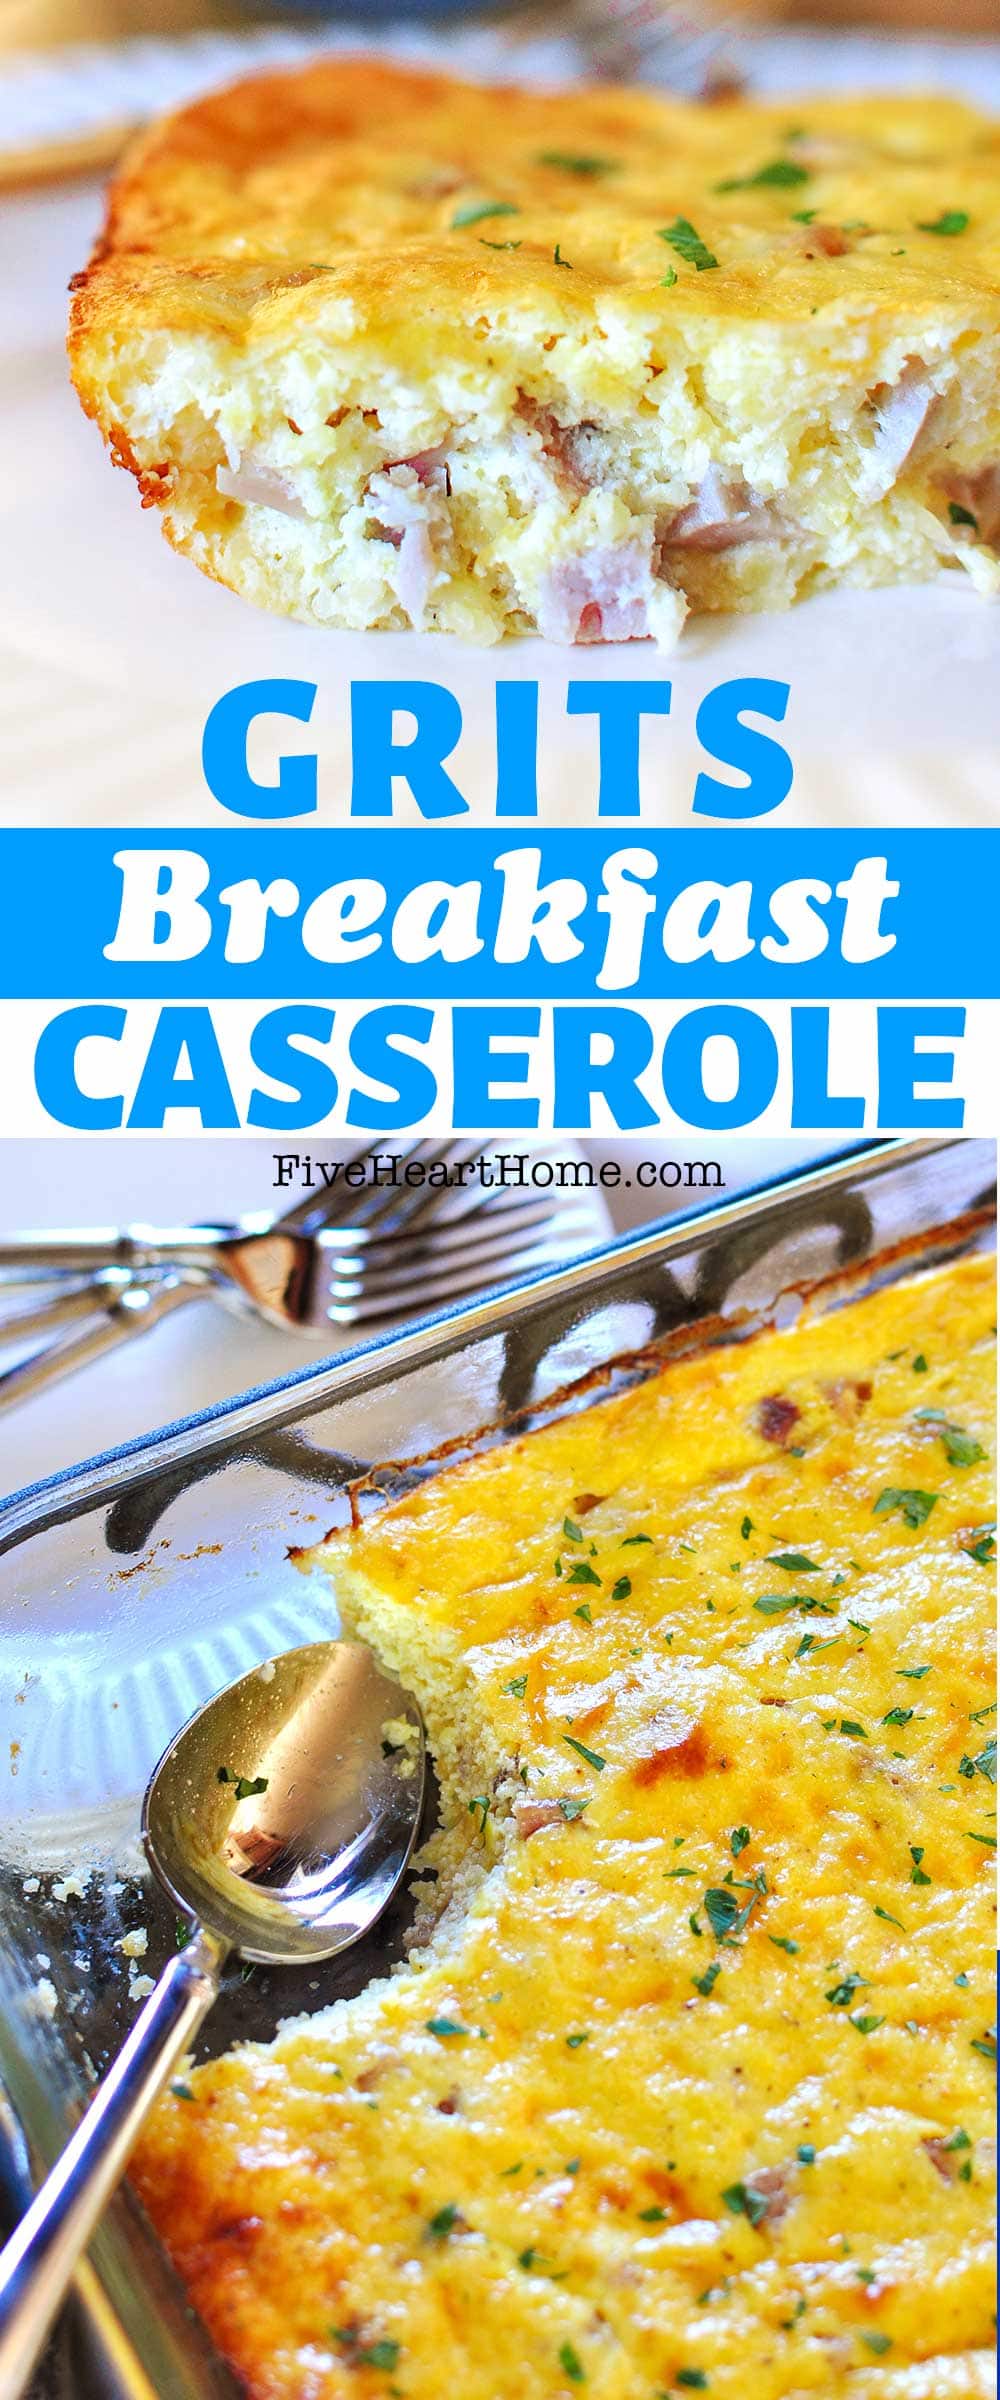 Grits Casserole ~ this savory, delicious breakfast casserole features creamy grits, scrambled eggs, shredded cheese, and diced ham for a special breakfast or brunch that's hearty, comforting, and perfect for making ahead! | FiveHeartHome.com via @fivehearthome